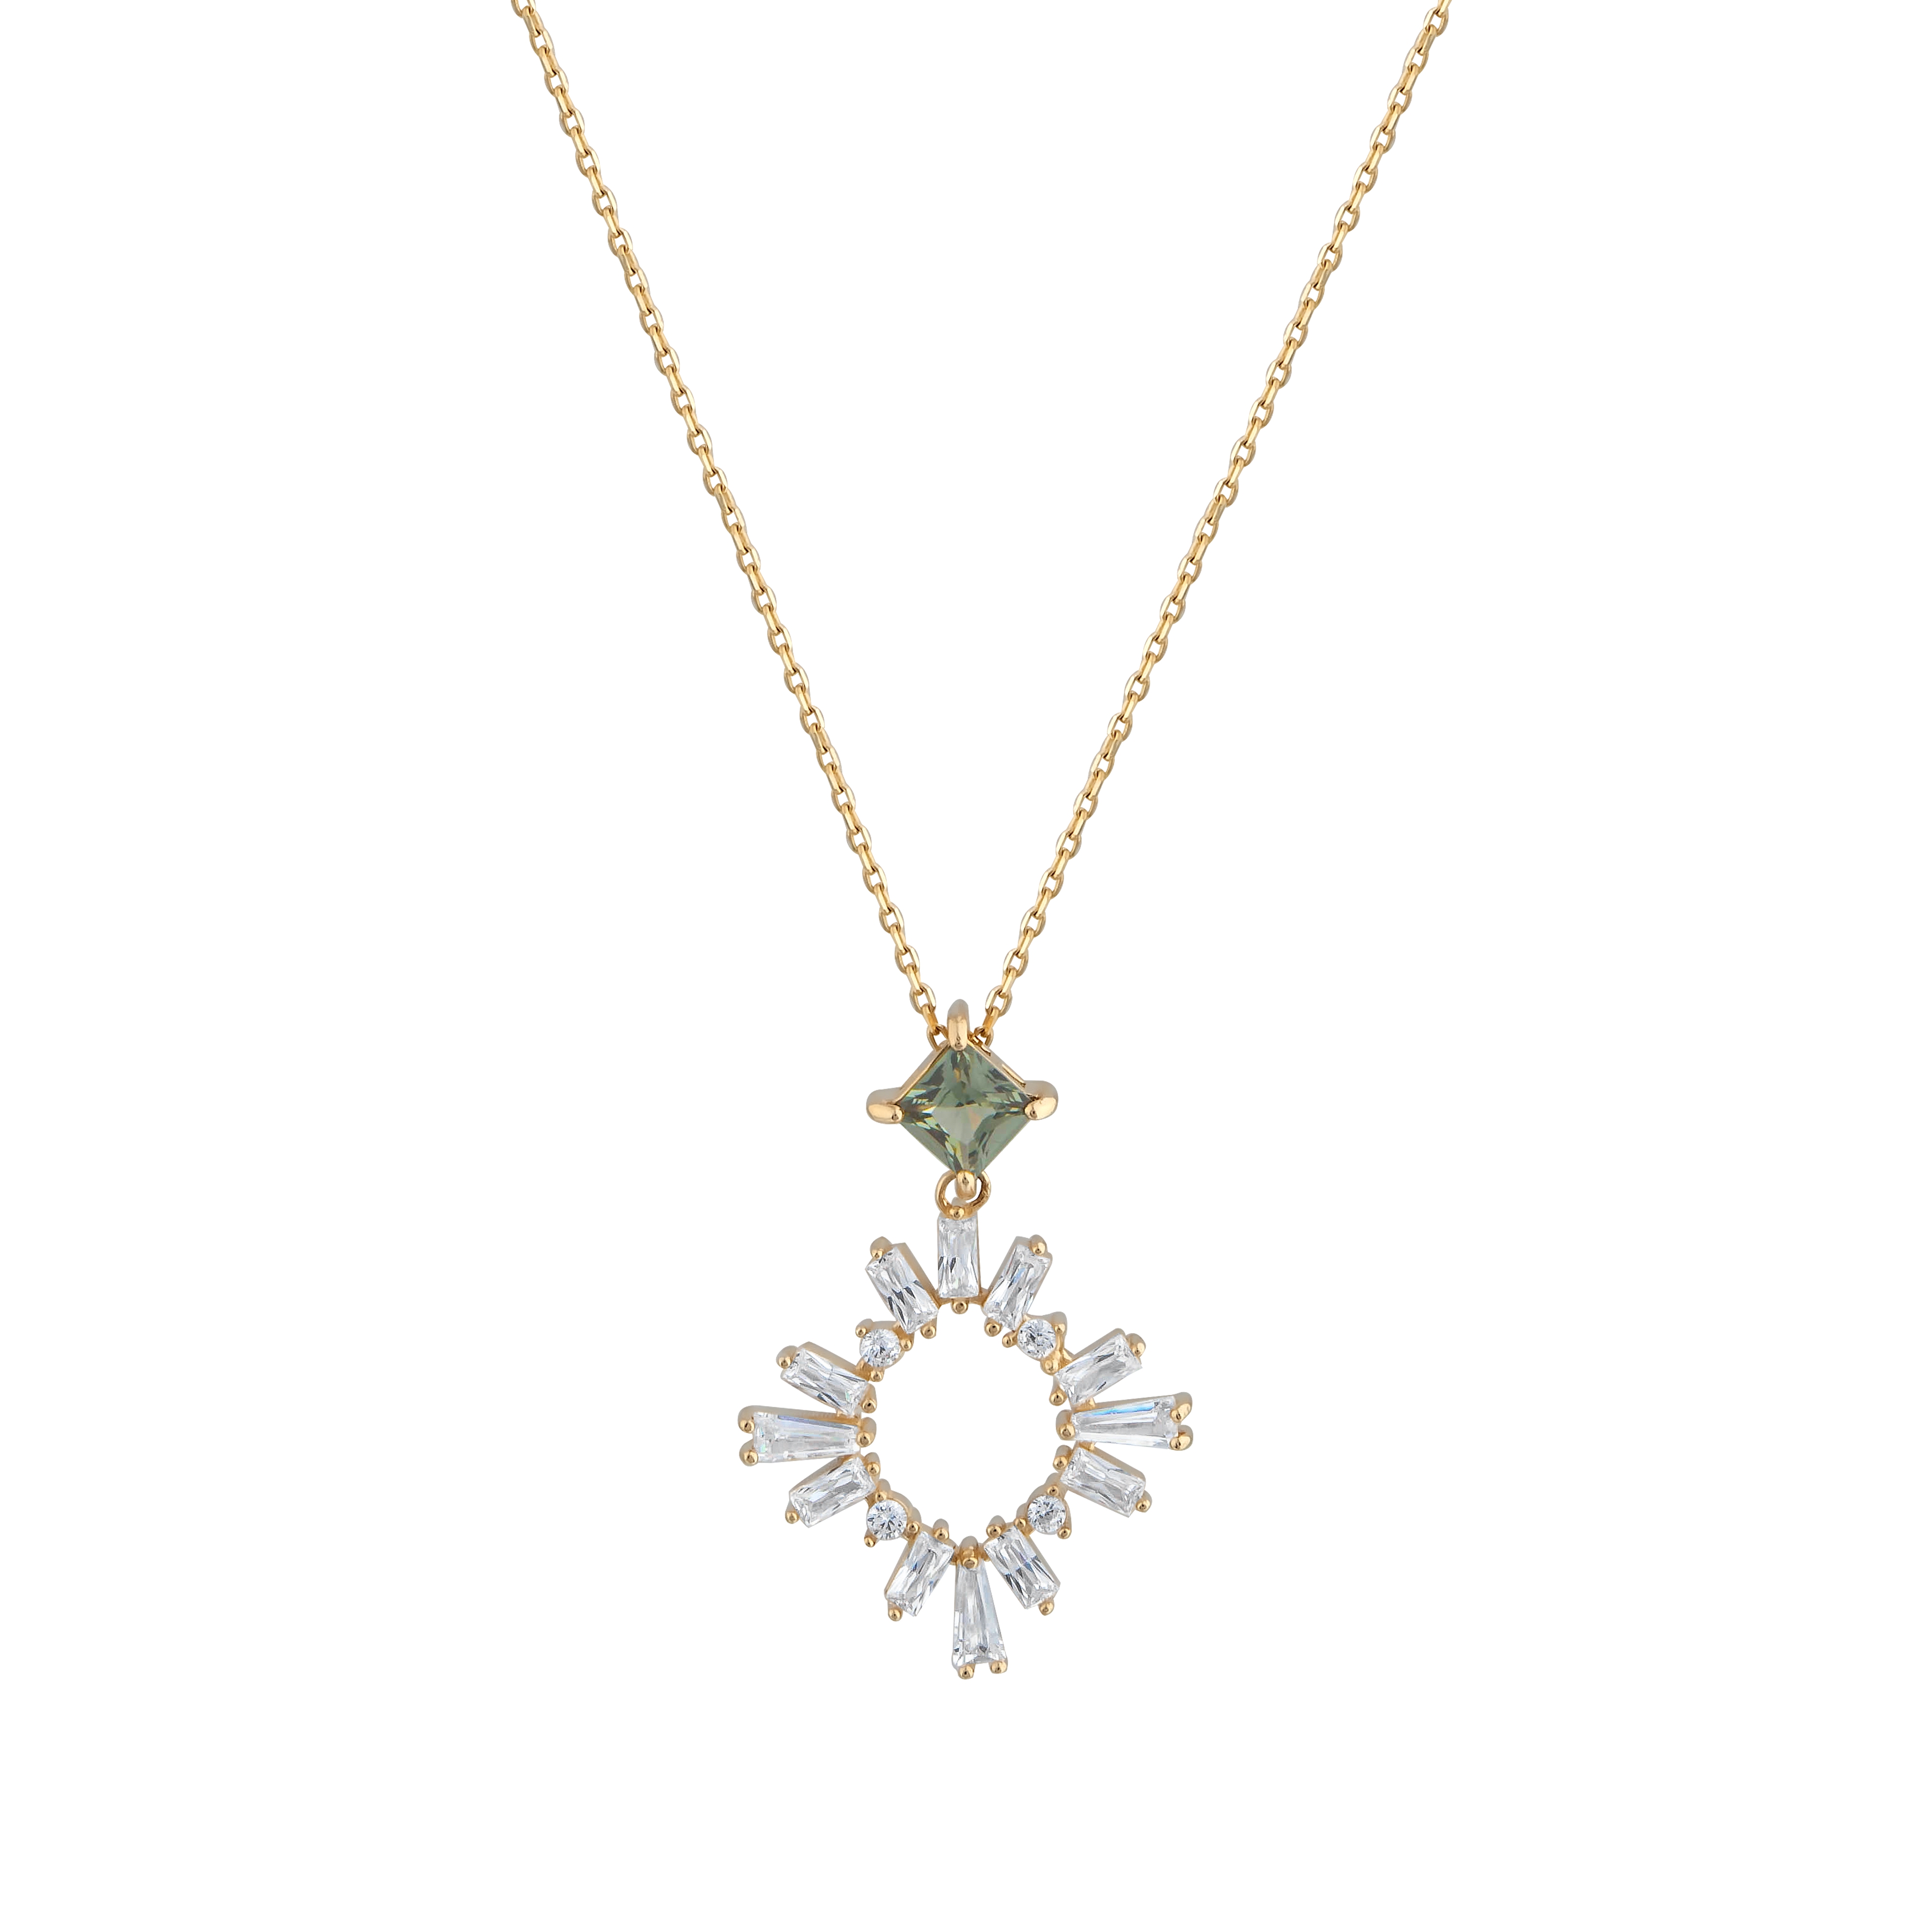 Created Pataiba Stone Clarit Jewellery 14K Gold Necklace